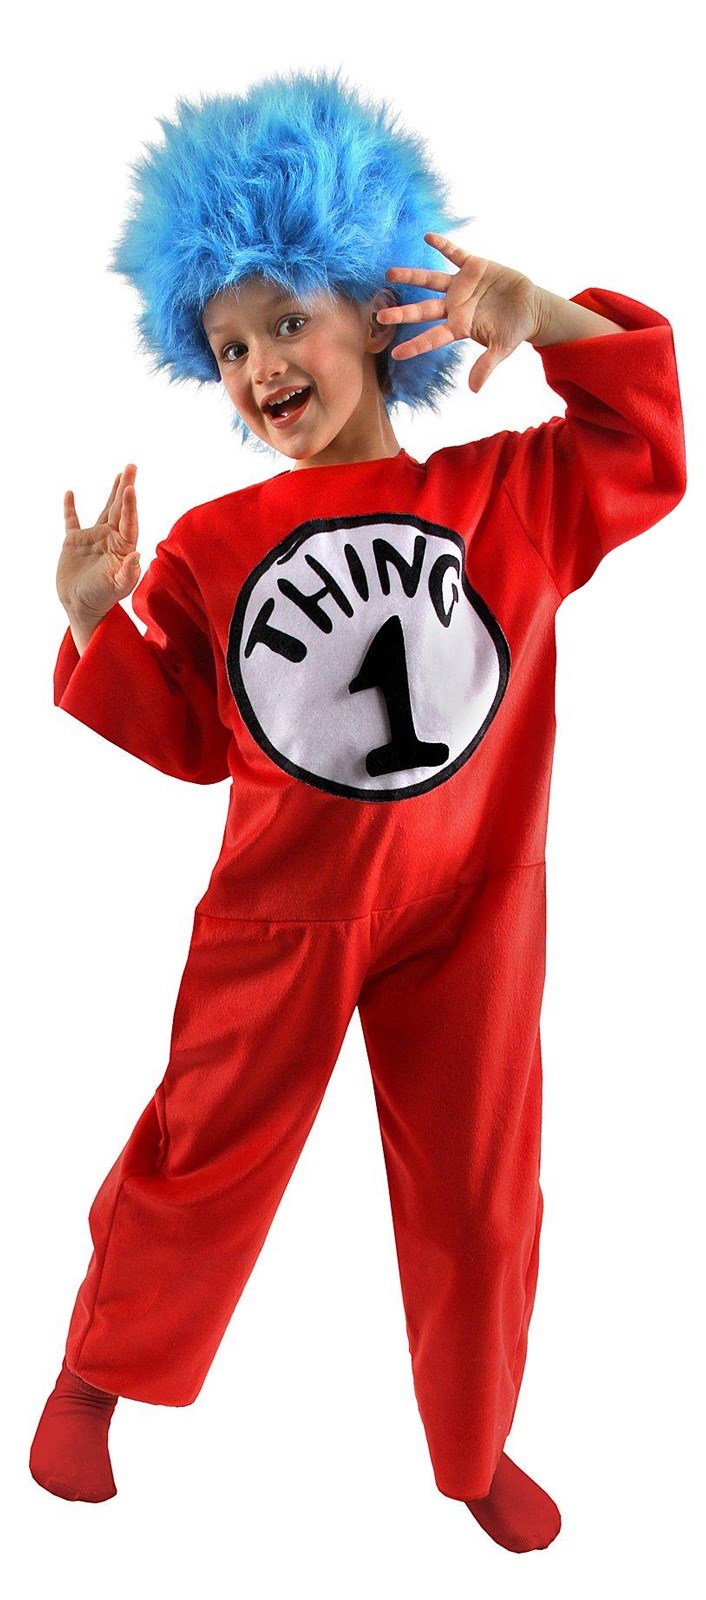 Dr. Seuss The Cat in the Hat - Thing 1 and Thing 2 Child Costume